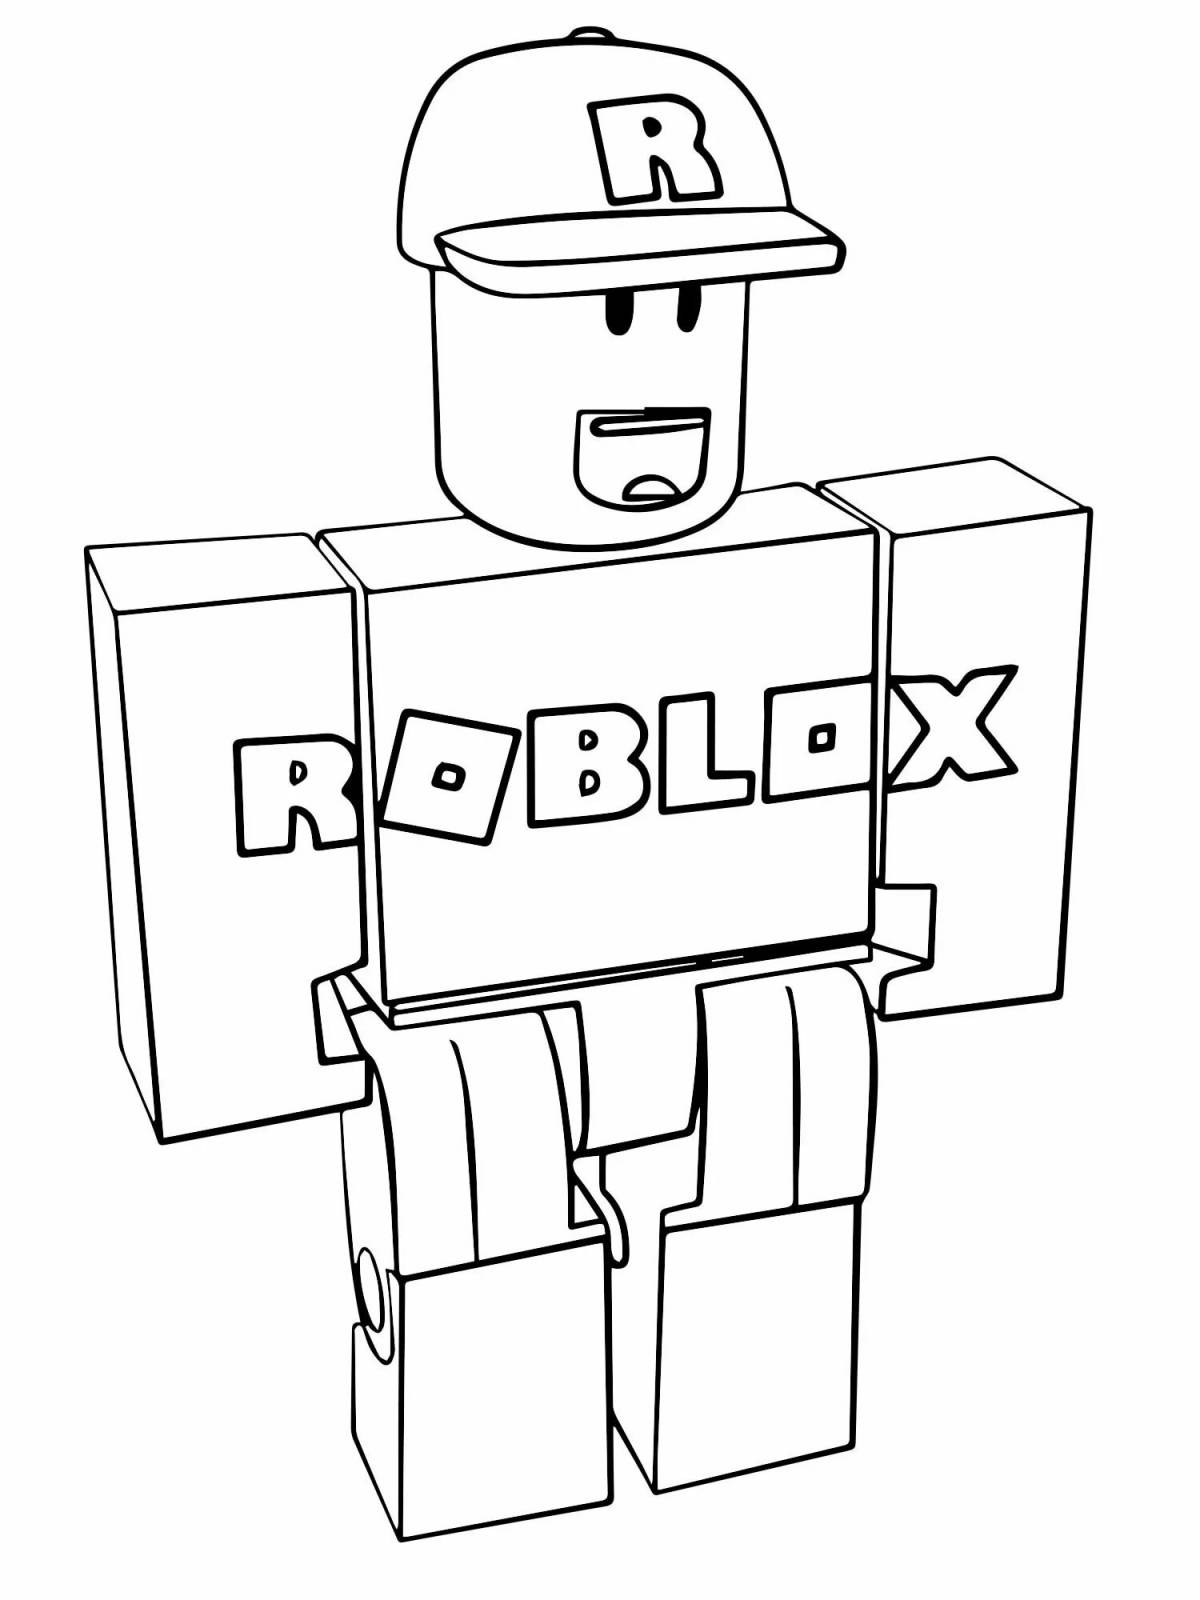 Roblox character coloring page with frenzied color